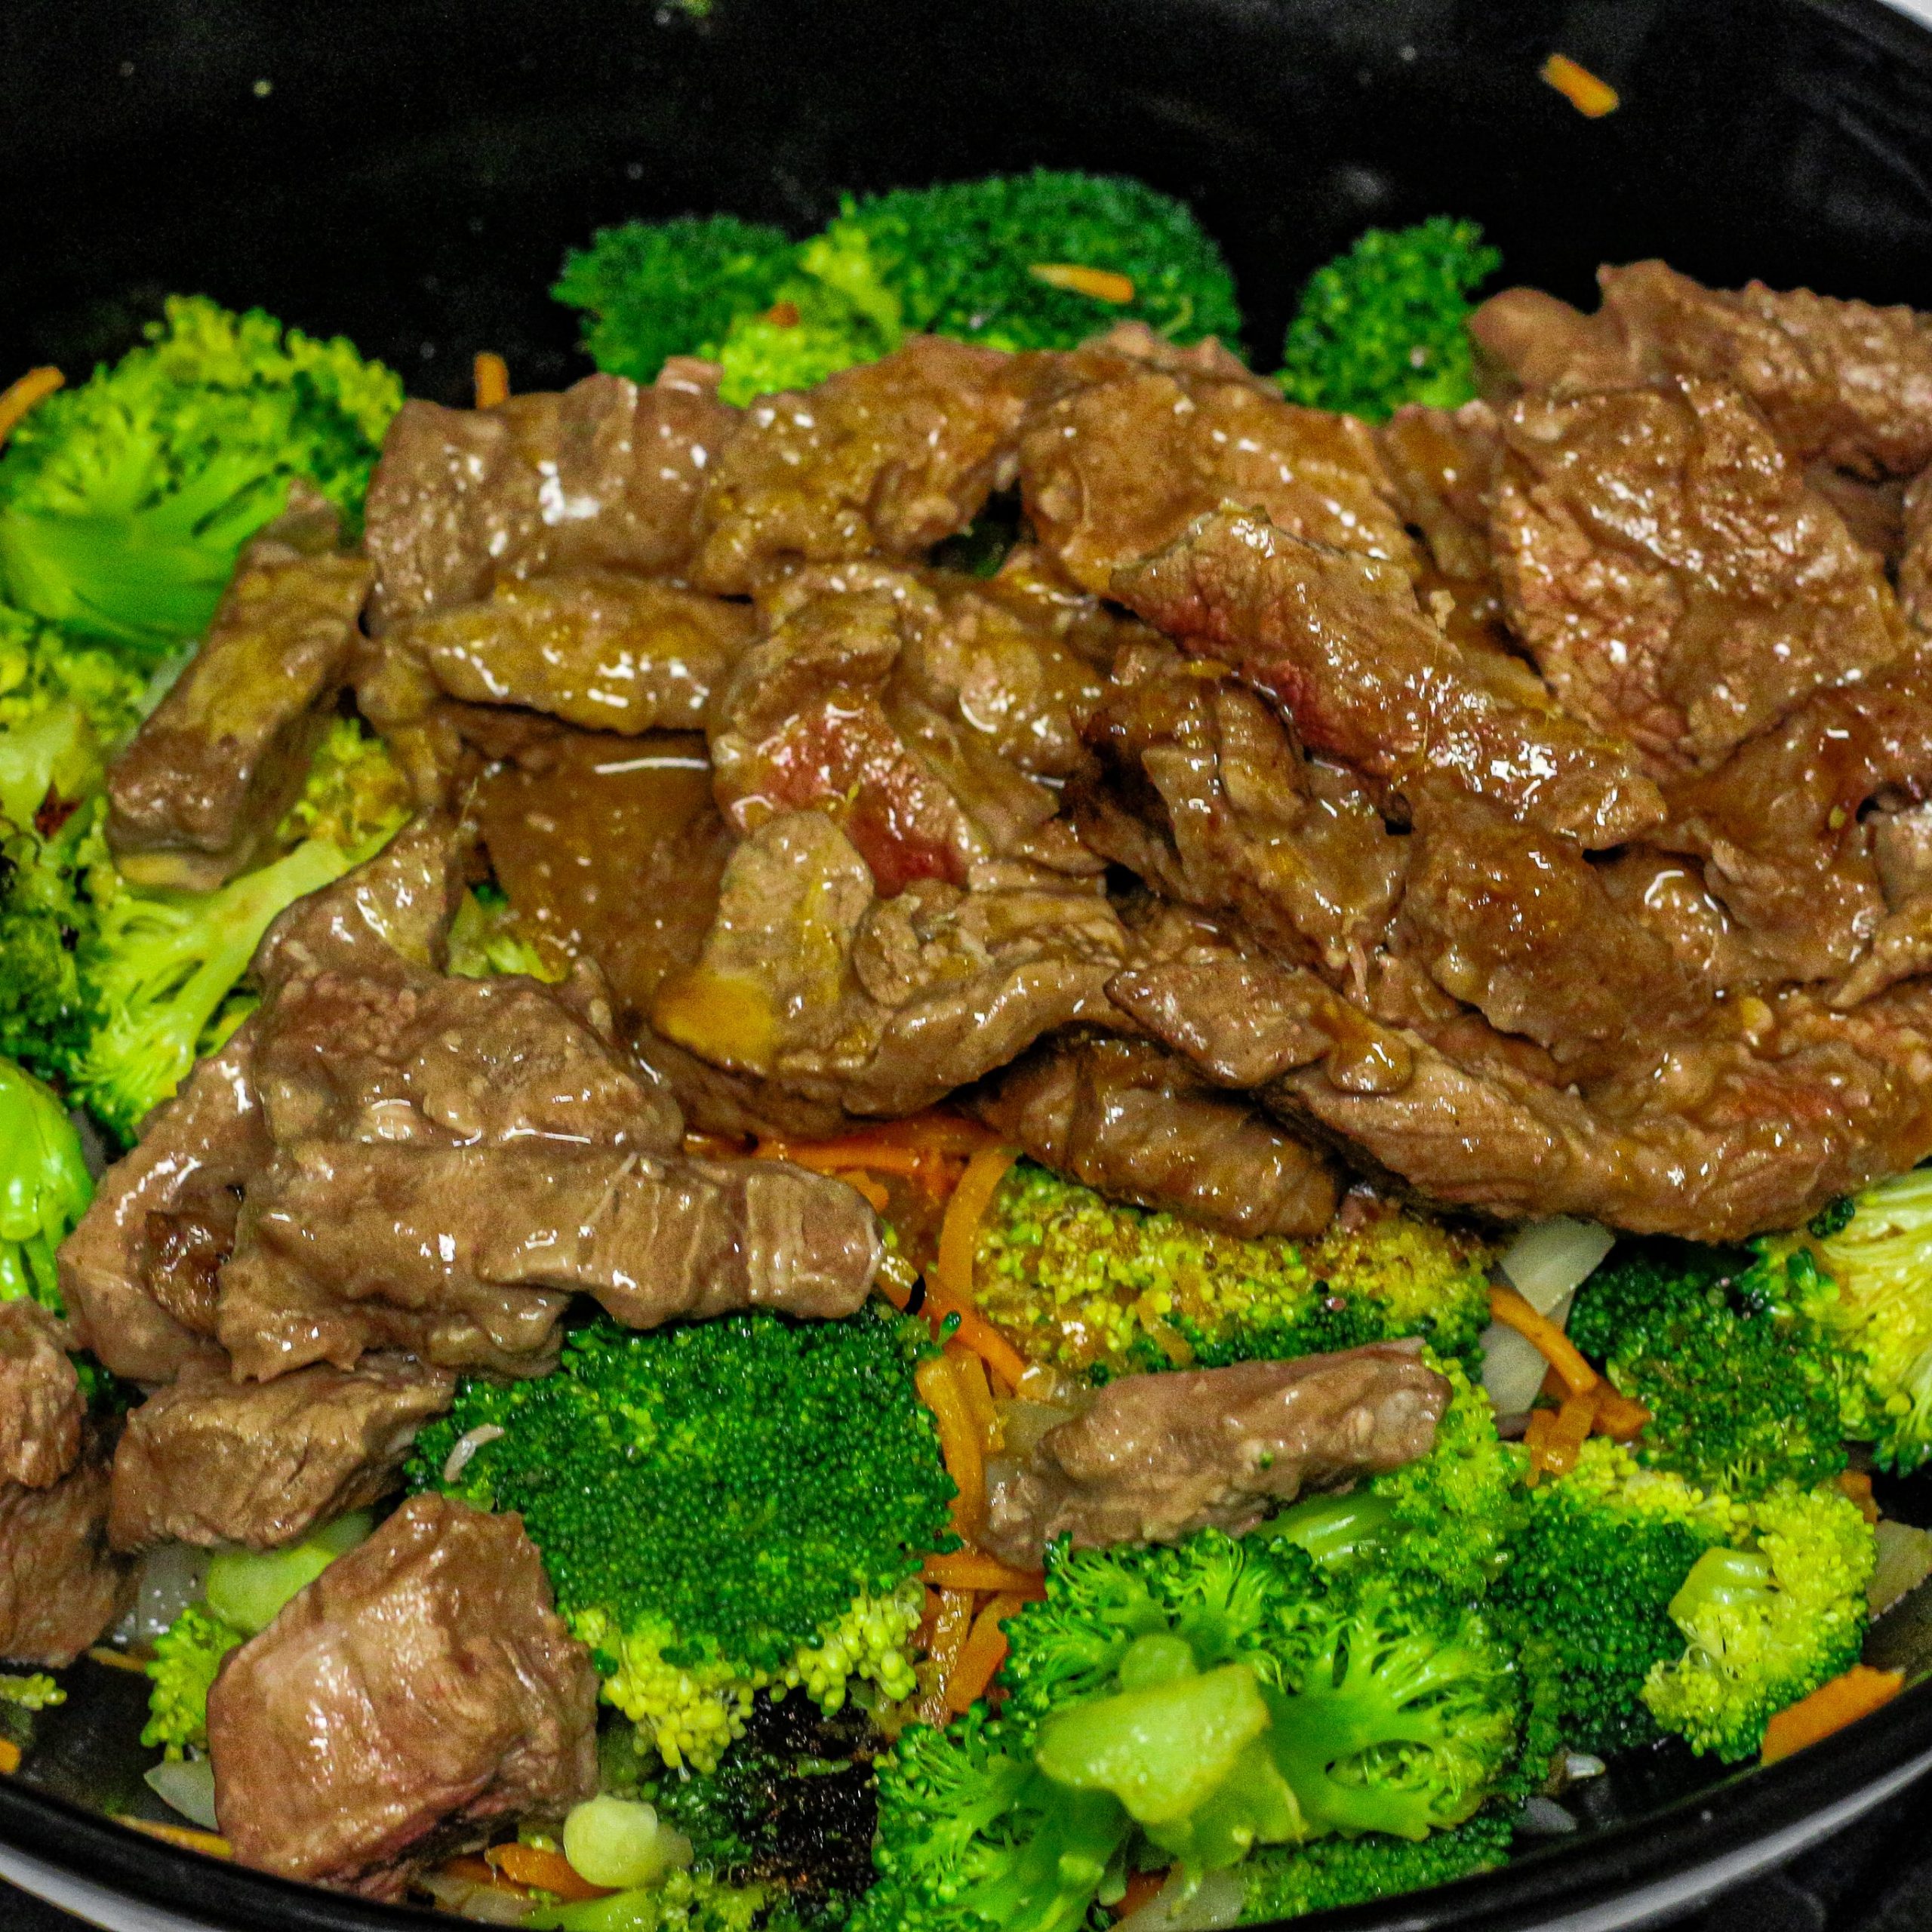 Stir-fry broccoli, carrots, and onion in the remaining oil. Add the beef and sauce.